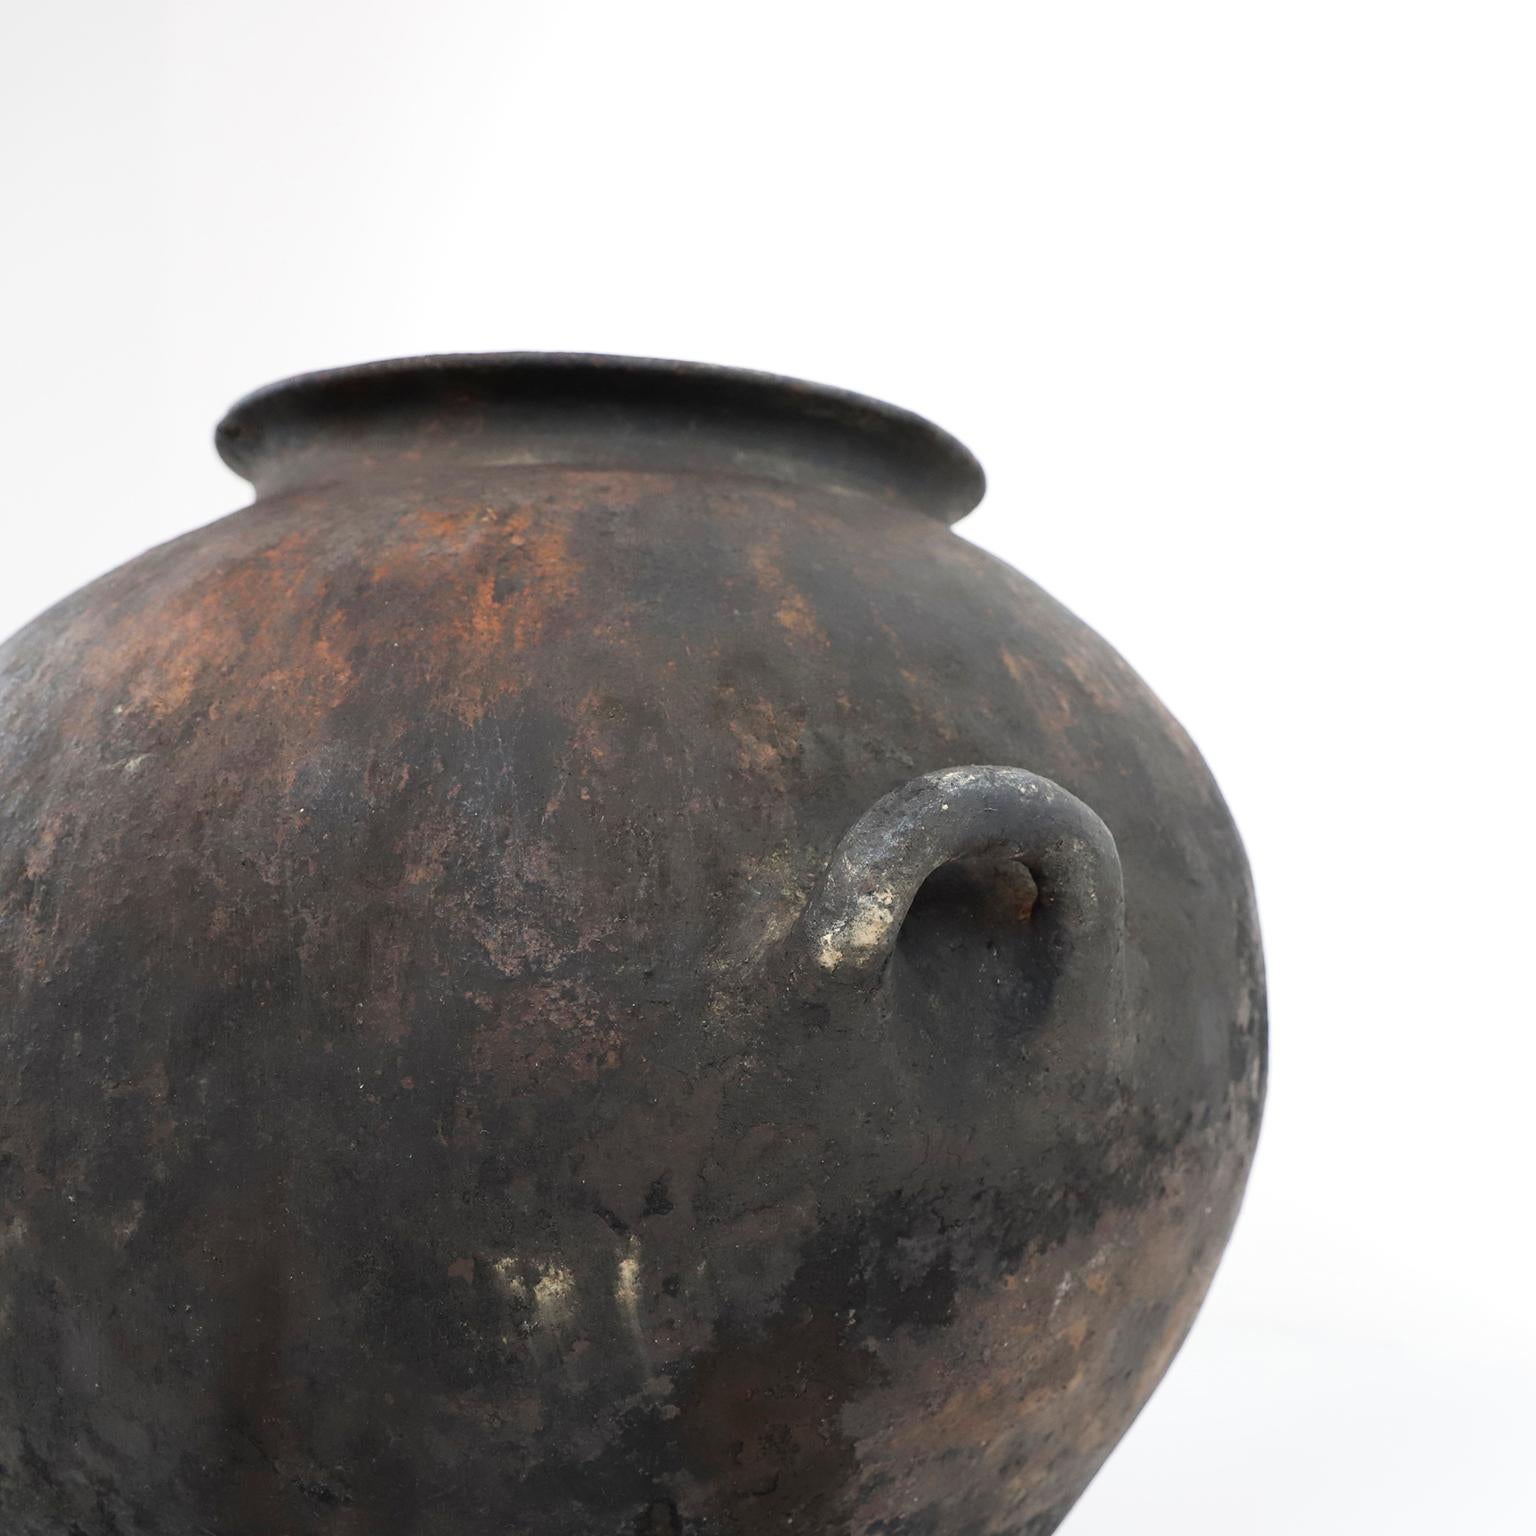 Circa 1940, we offer this fantastic ancient barro pot from Mexico, made in Puebla México hand crafted . This style of pottery is very rare, originally used for storing water from nearby rivers. One lug of the pot is broken.